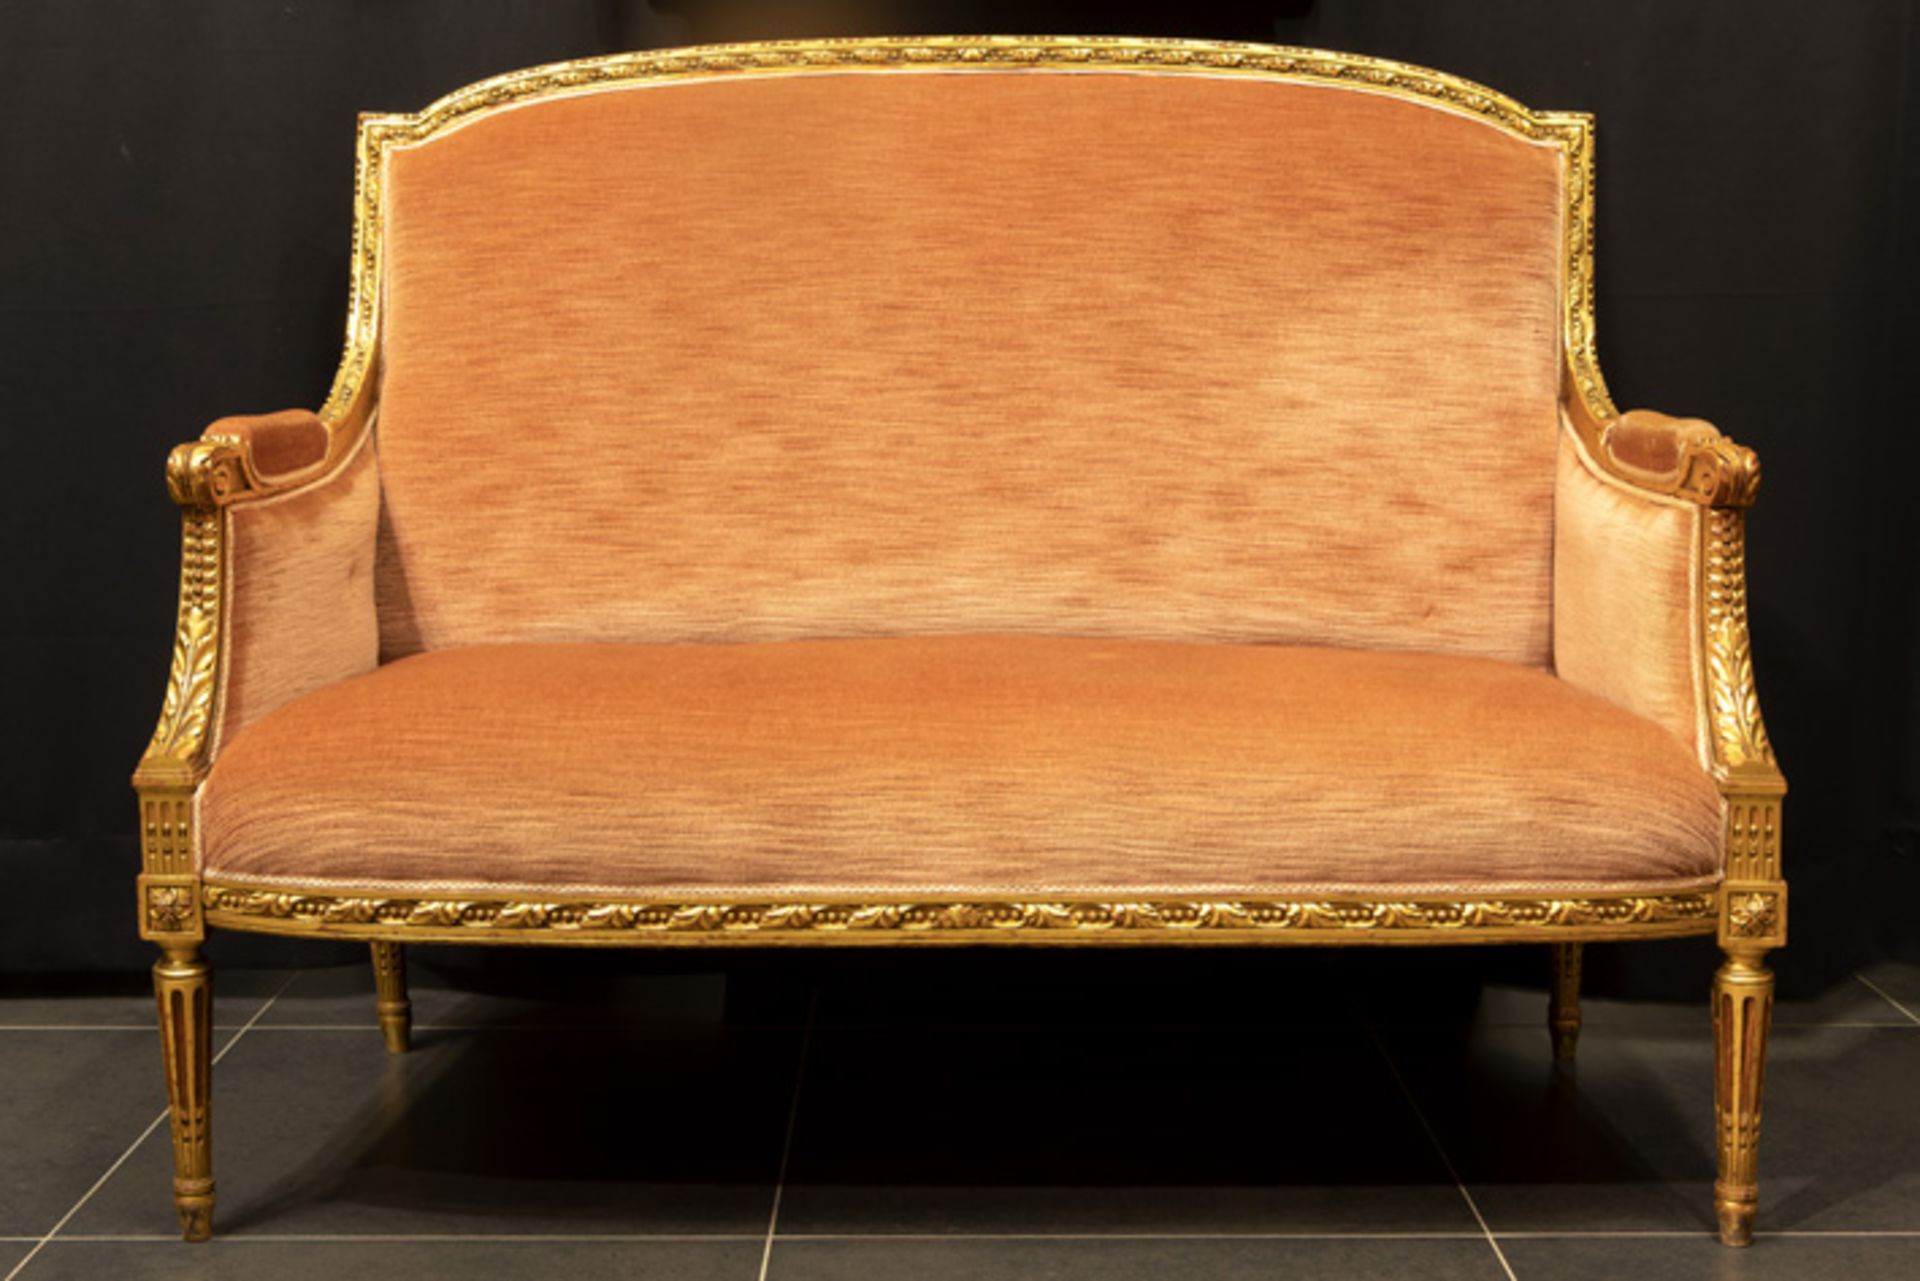 'antique' neoclassical settee in sculpted and gilded wood || 'Antieke' neoclassicistische